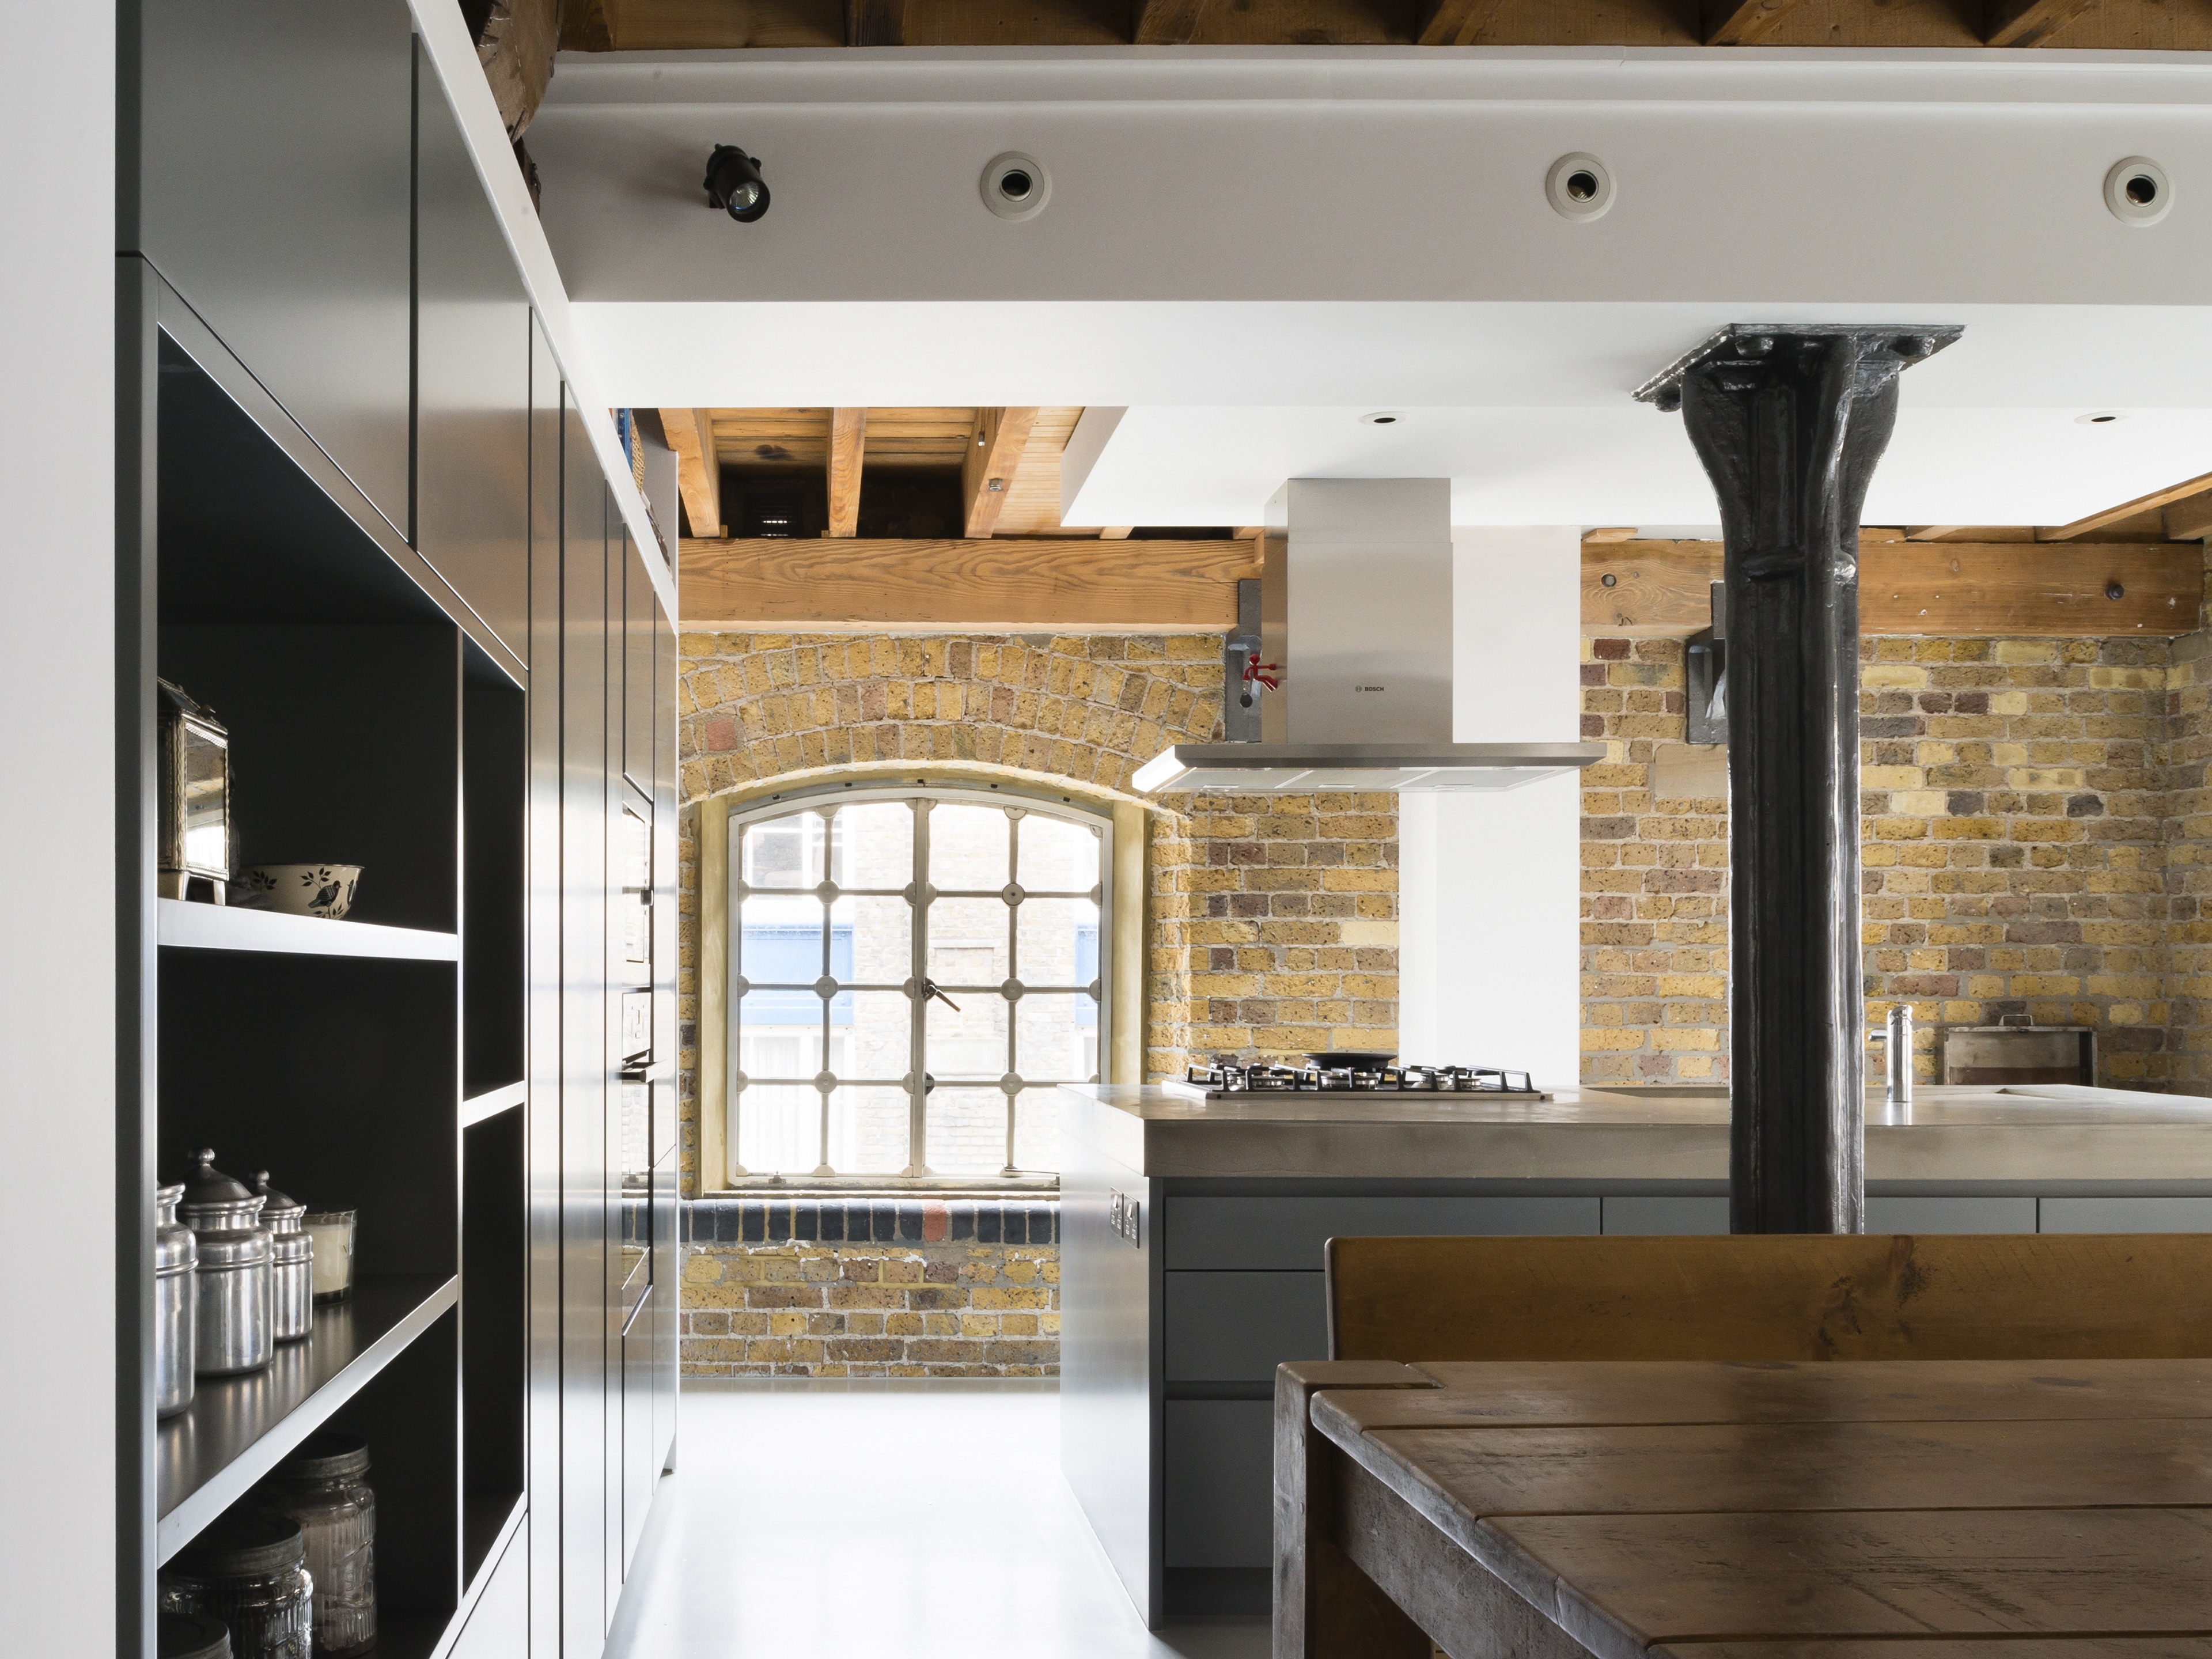 </p> <p>Find your ideal home design pro on designfor-me.com - get matched and see who's interested in your home project. Click image to see more inspiration from our design pros</p> <p>Design by Bianca, architect from Southwark, London</p> <p>#architecture #homedesign #modernhomes #homeinspiration #renovation #exposedbrick </p> <p>